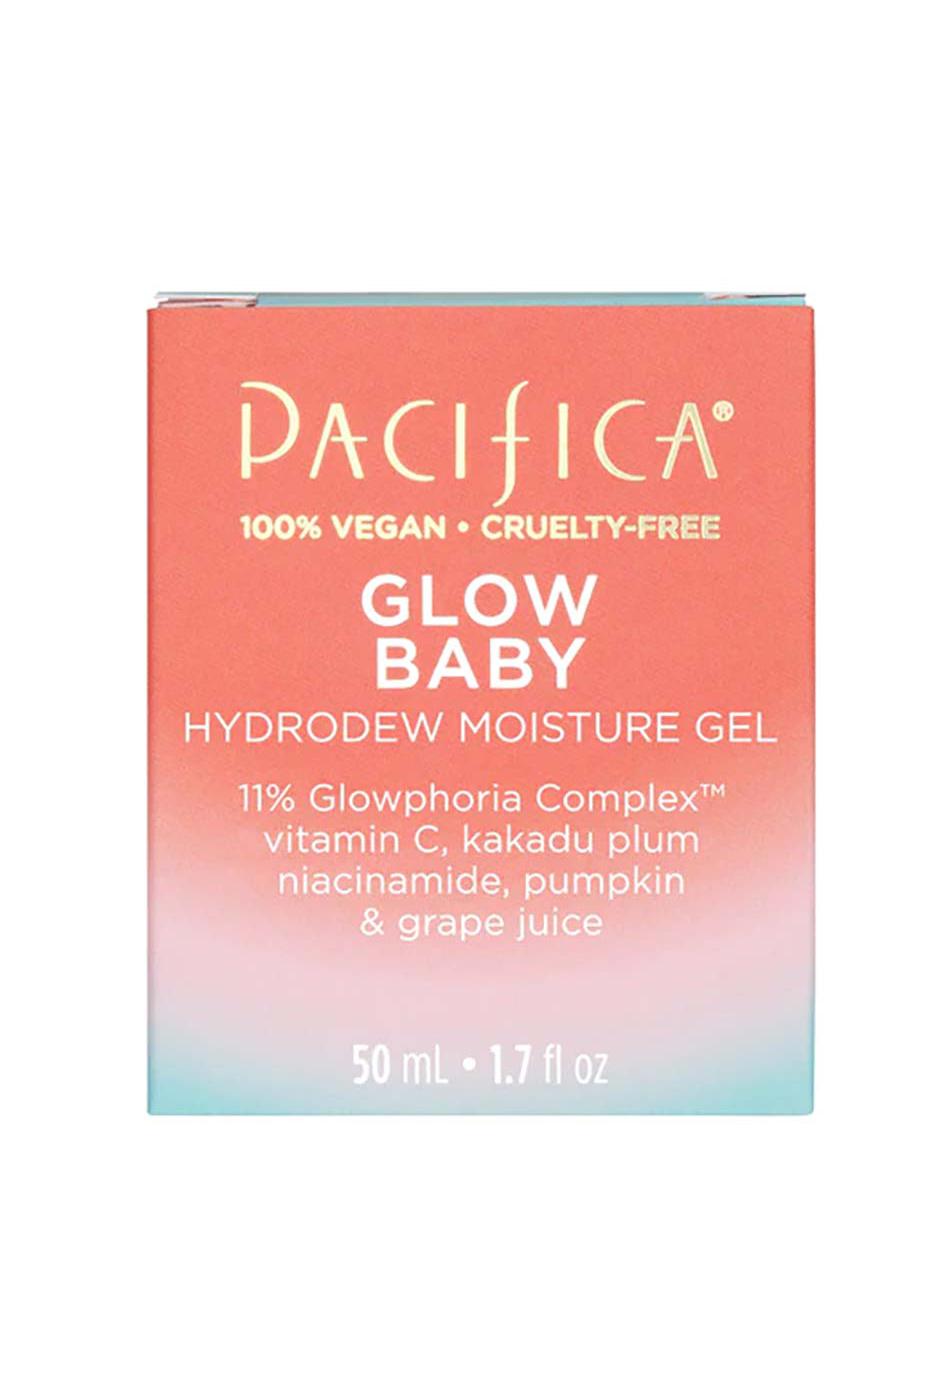 Pacifica Glow Baby Hydrodew Moisture Gel; image 1 of 2